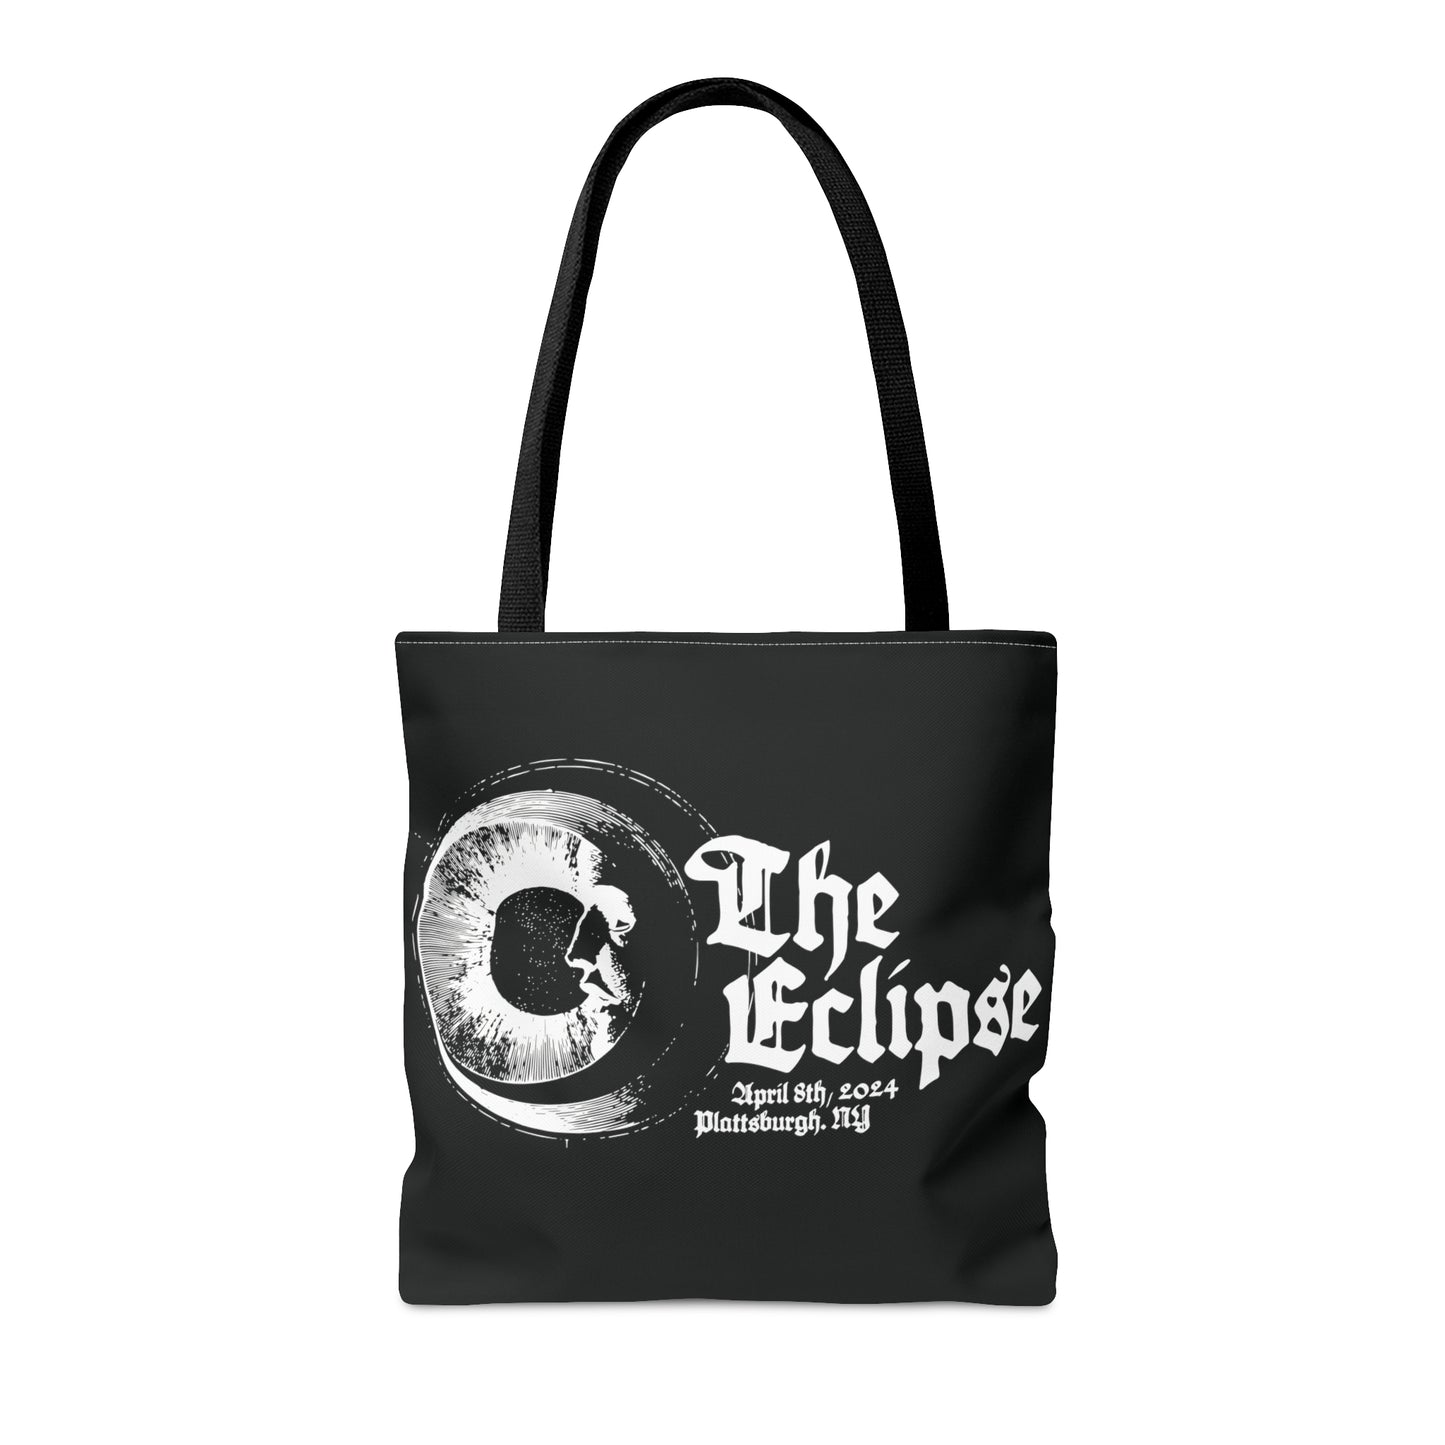 The Man on The Moon Tote